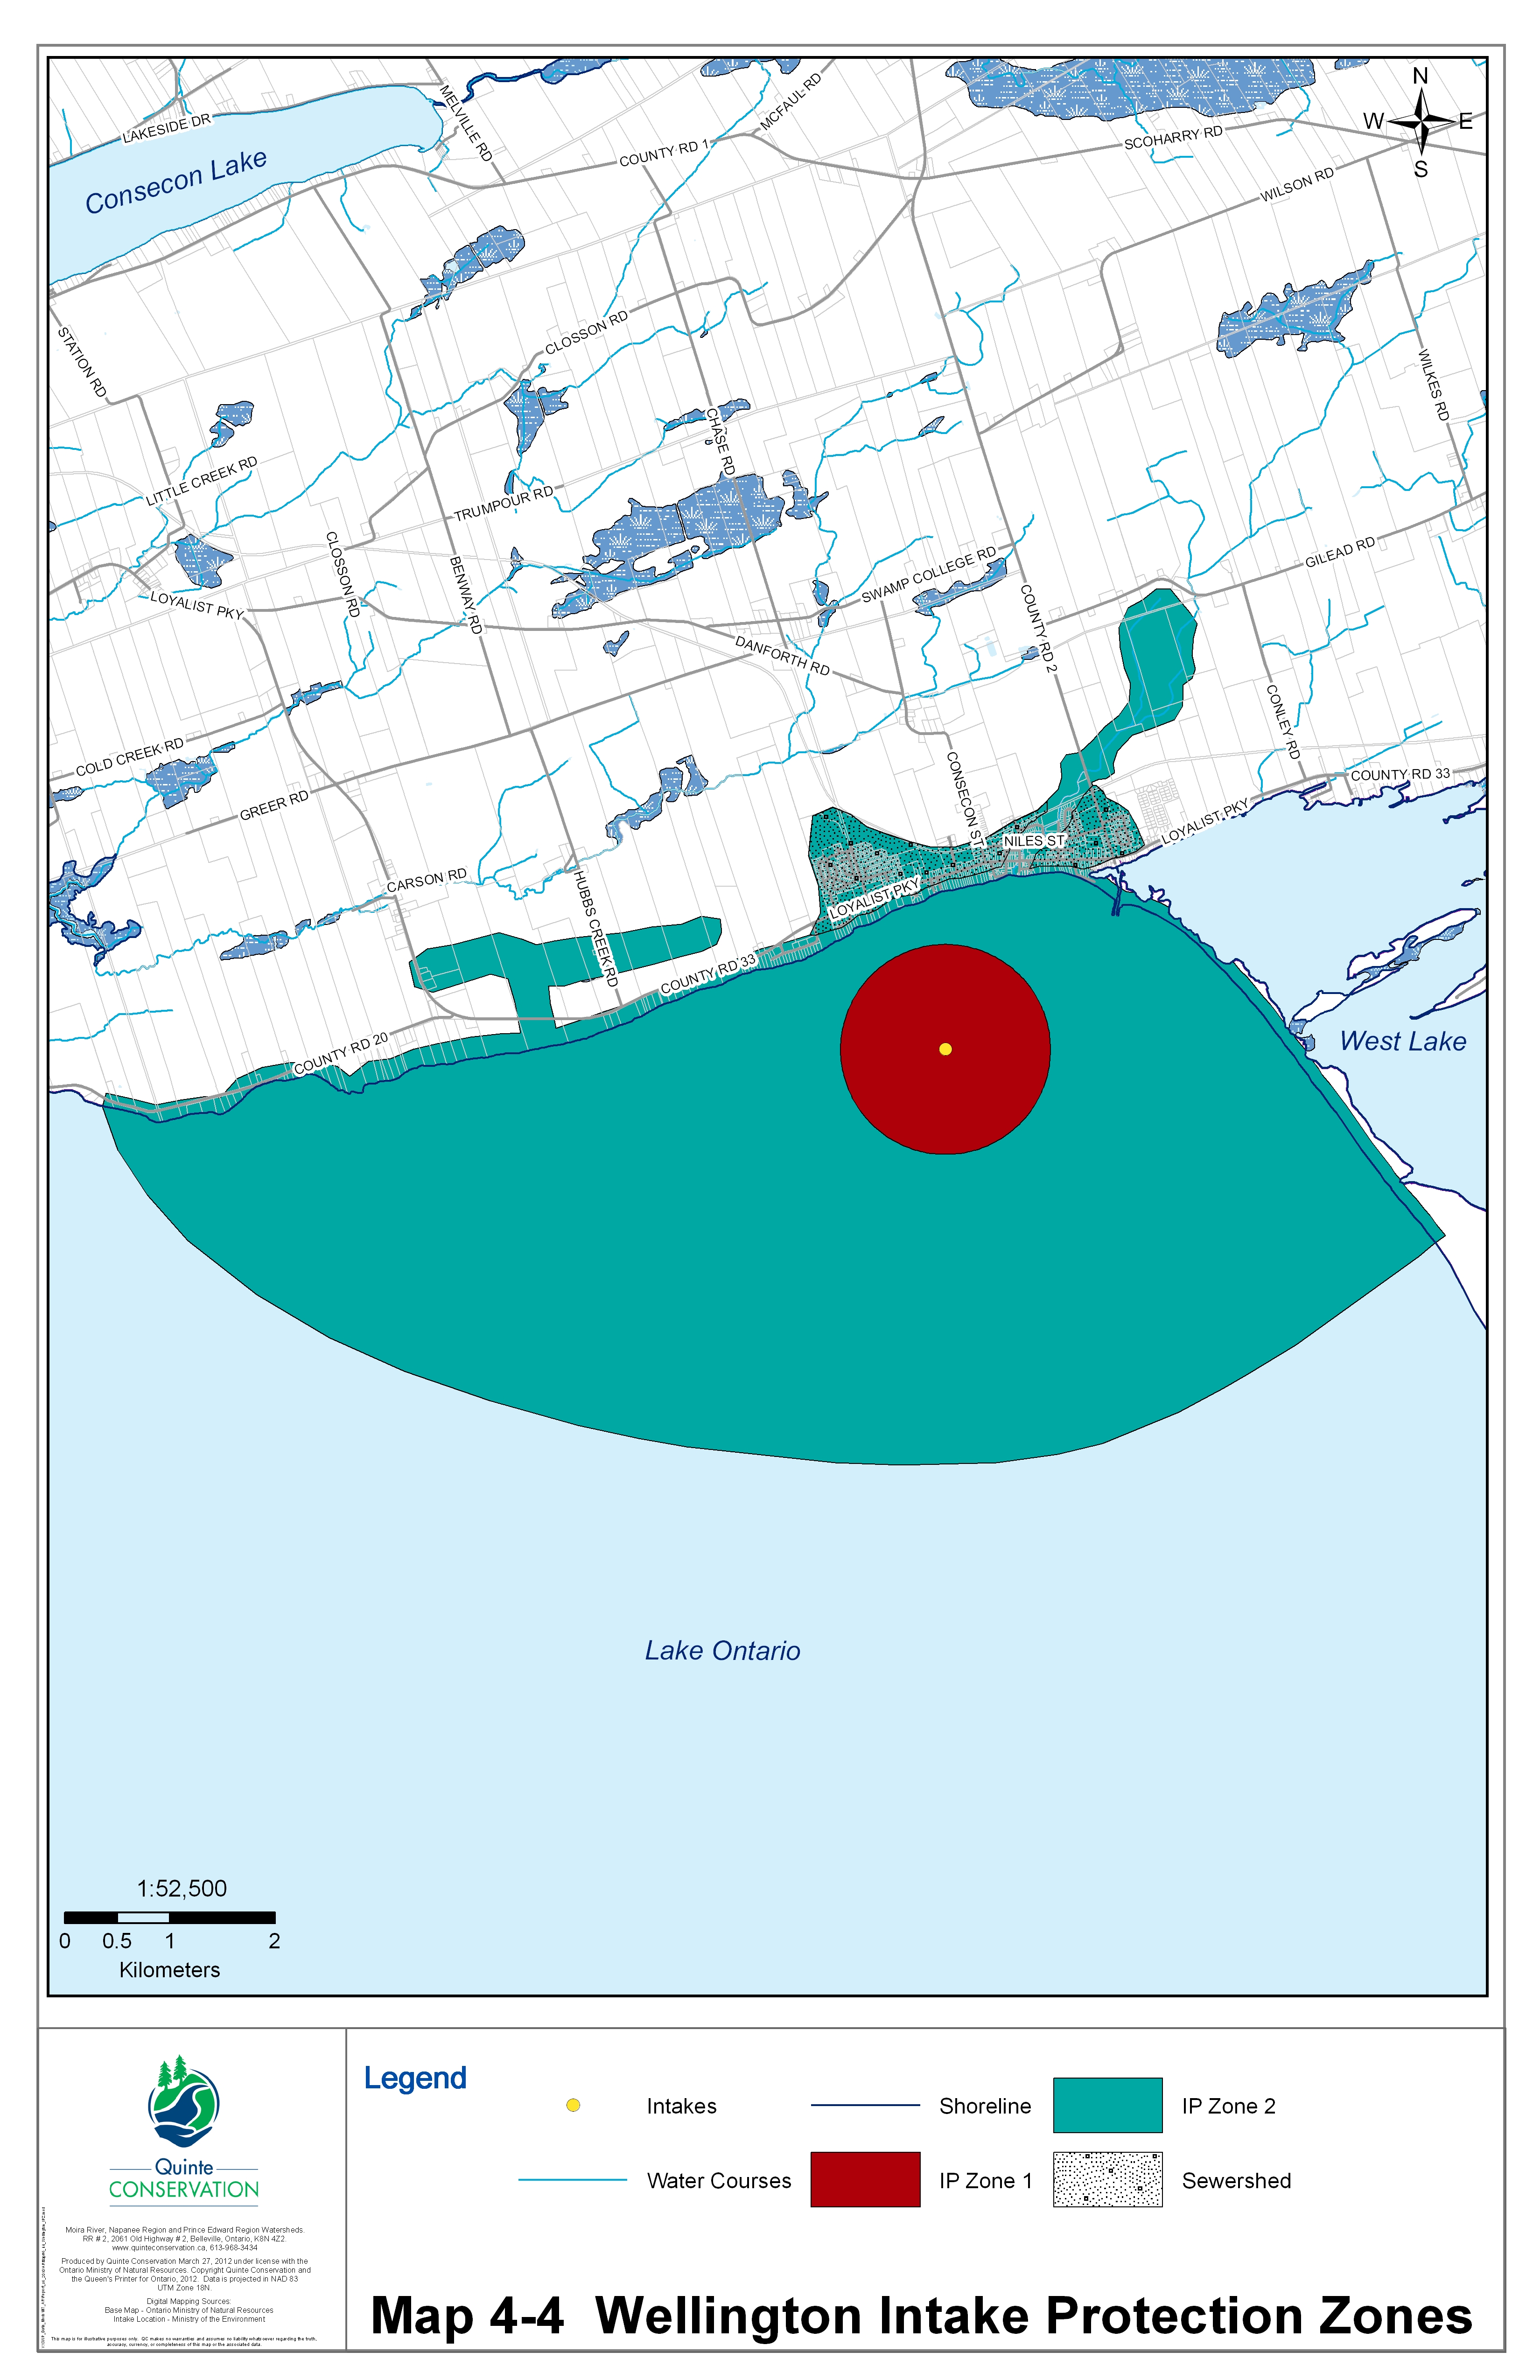 Drinking water systems map for PEC and Wellington